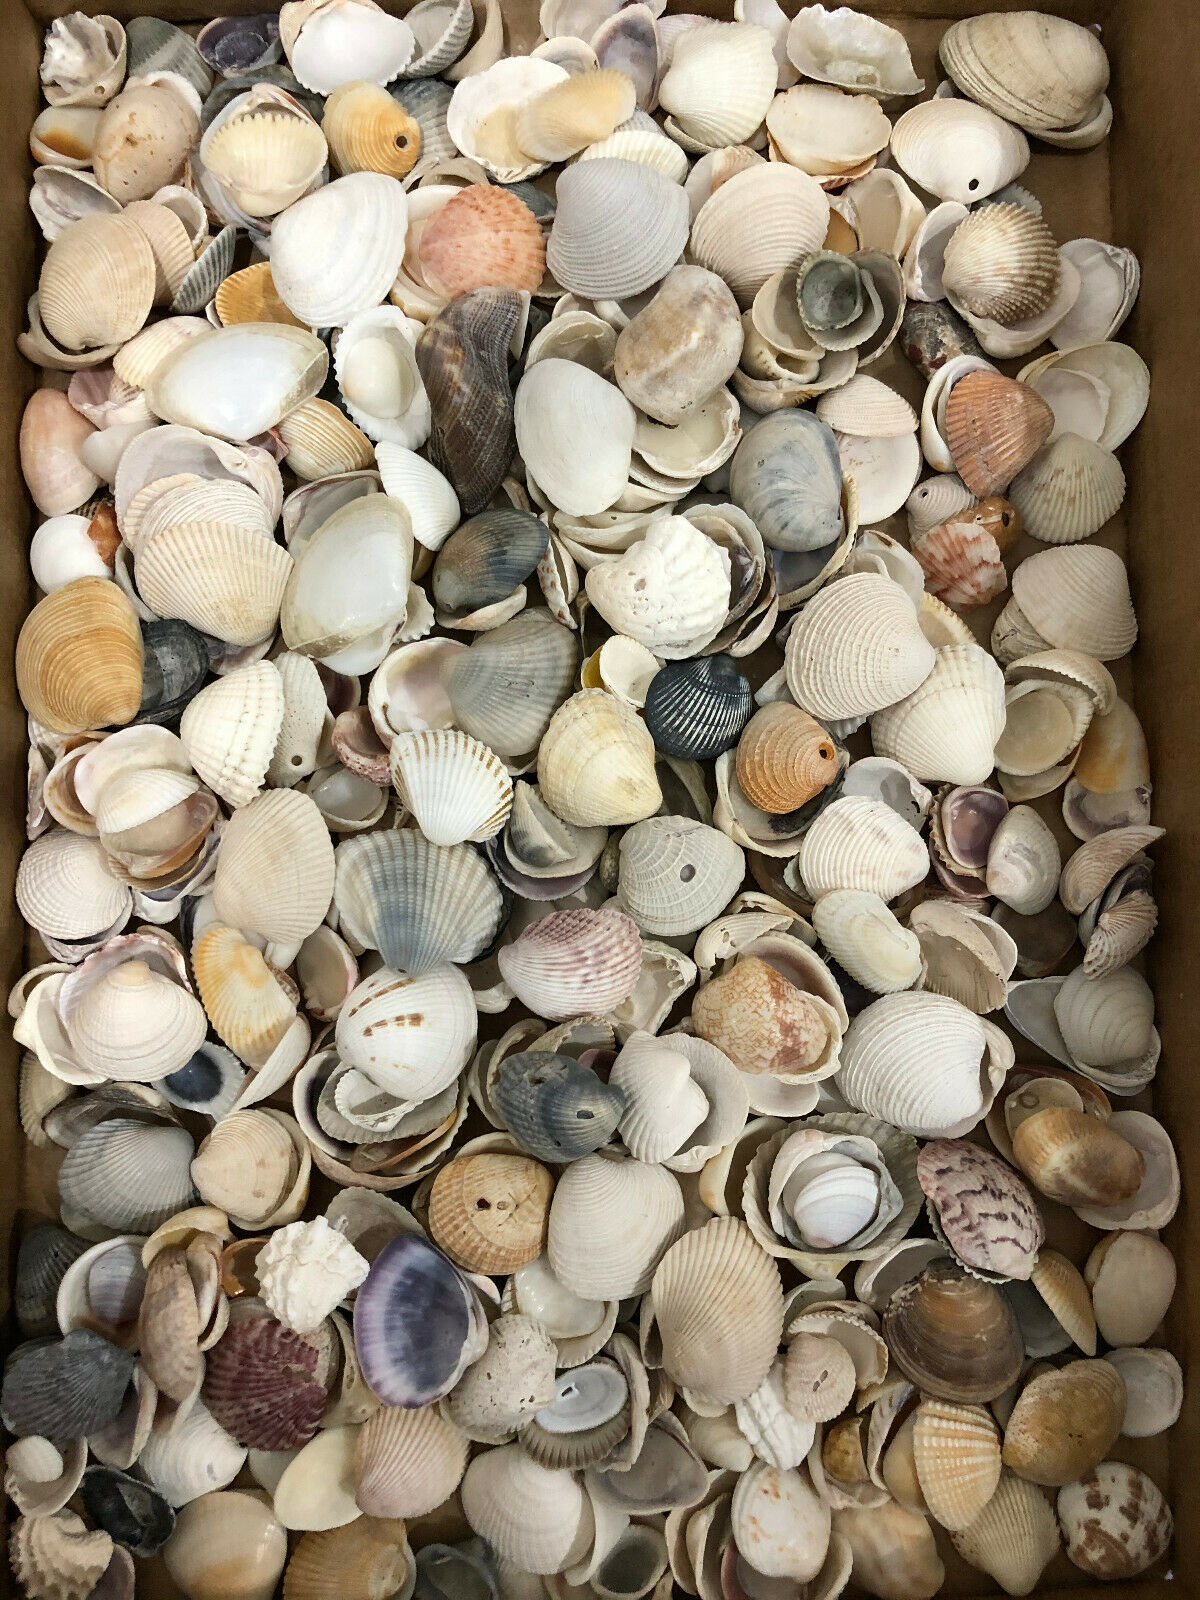 Clam Shells Seashells Collection 2 Lbs 1 Inch And Less # 1